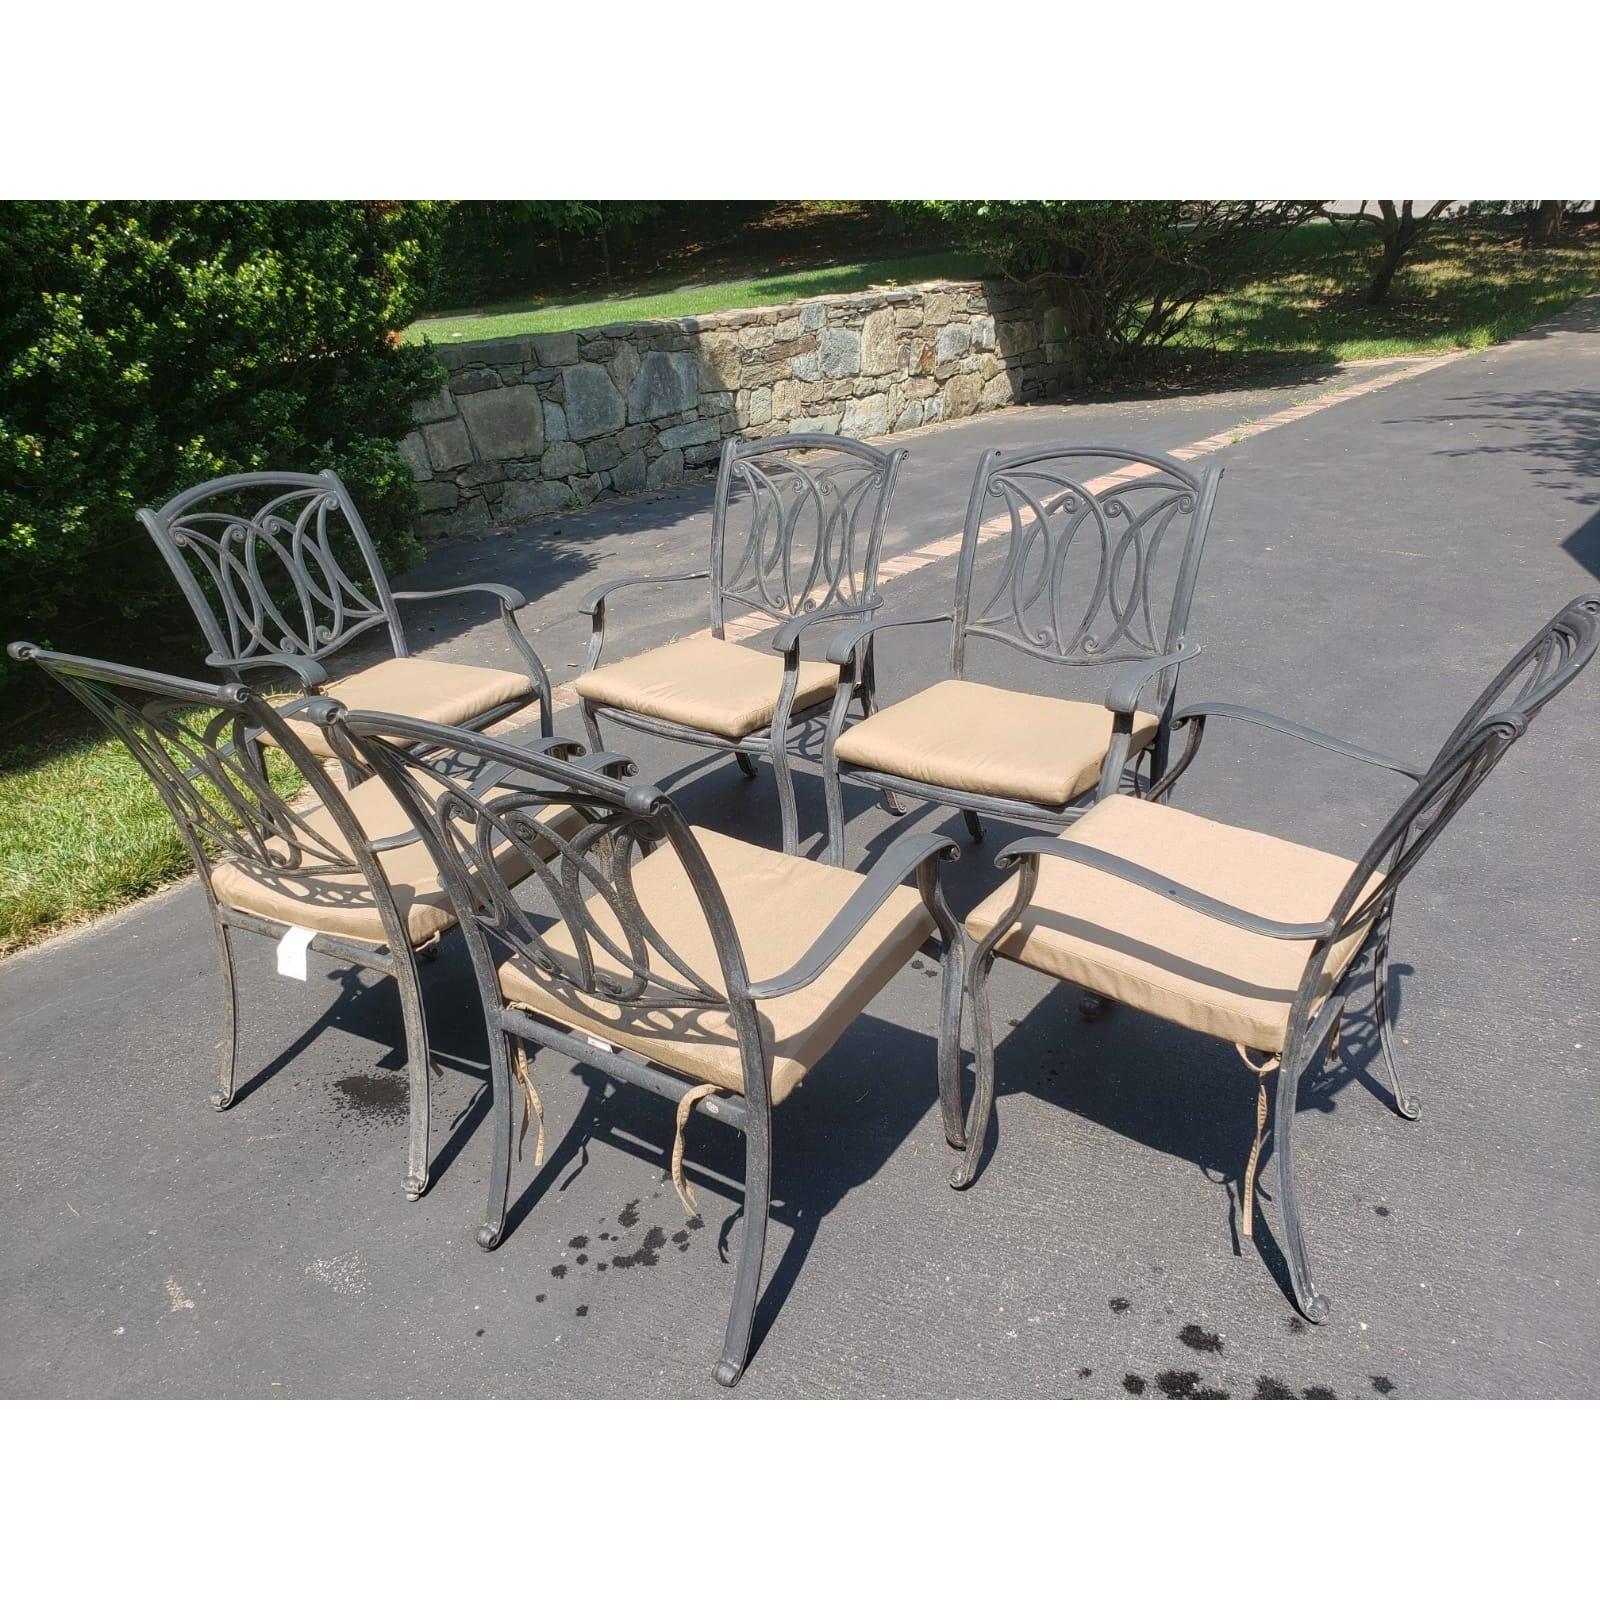 Vintage metal UV rust resistant stackable patio armchairs
set. Light weight aluminum frame very durable, Water Resistant; UV Resistant and Rust Resistant. 
Good vintage condition. Cushions optional.. Generous size 24W x 24D x 35H. Cushions are